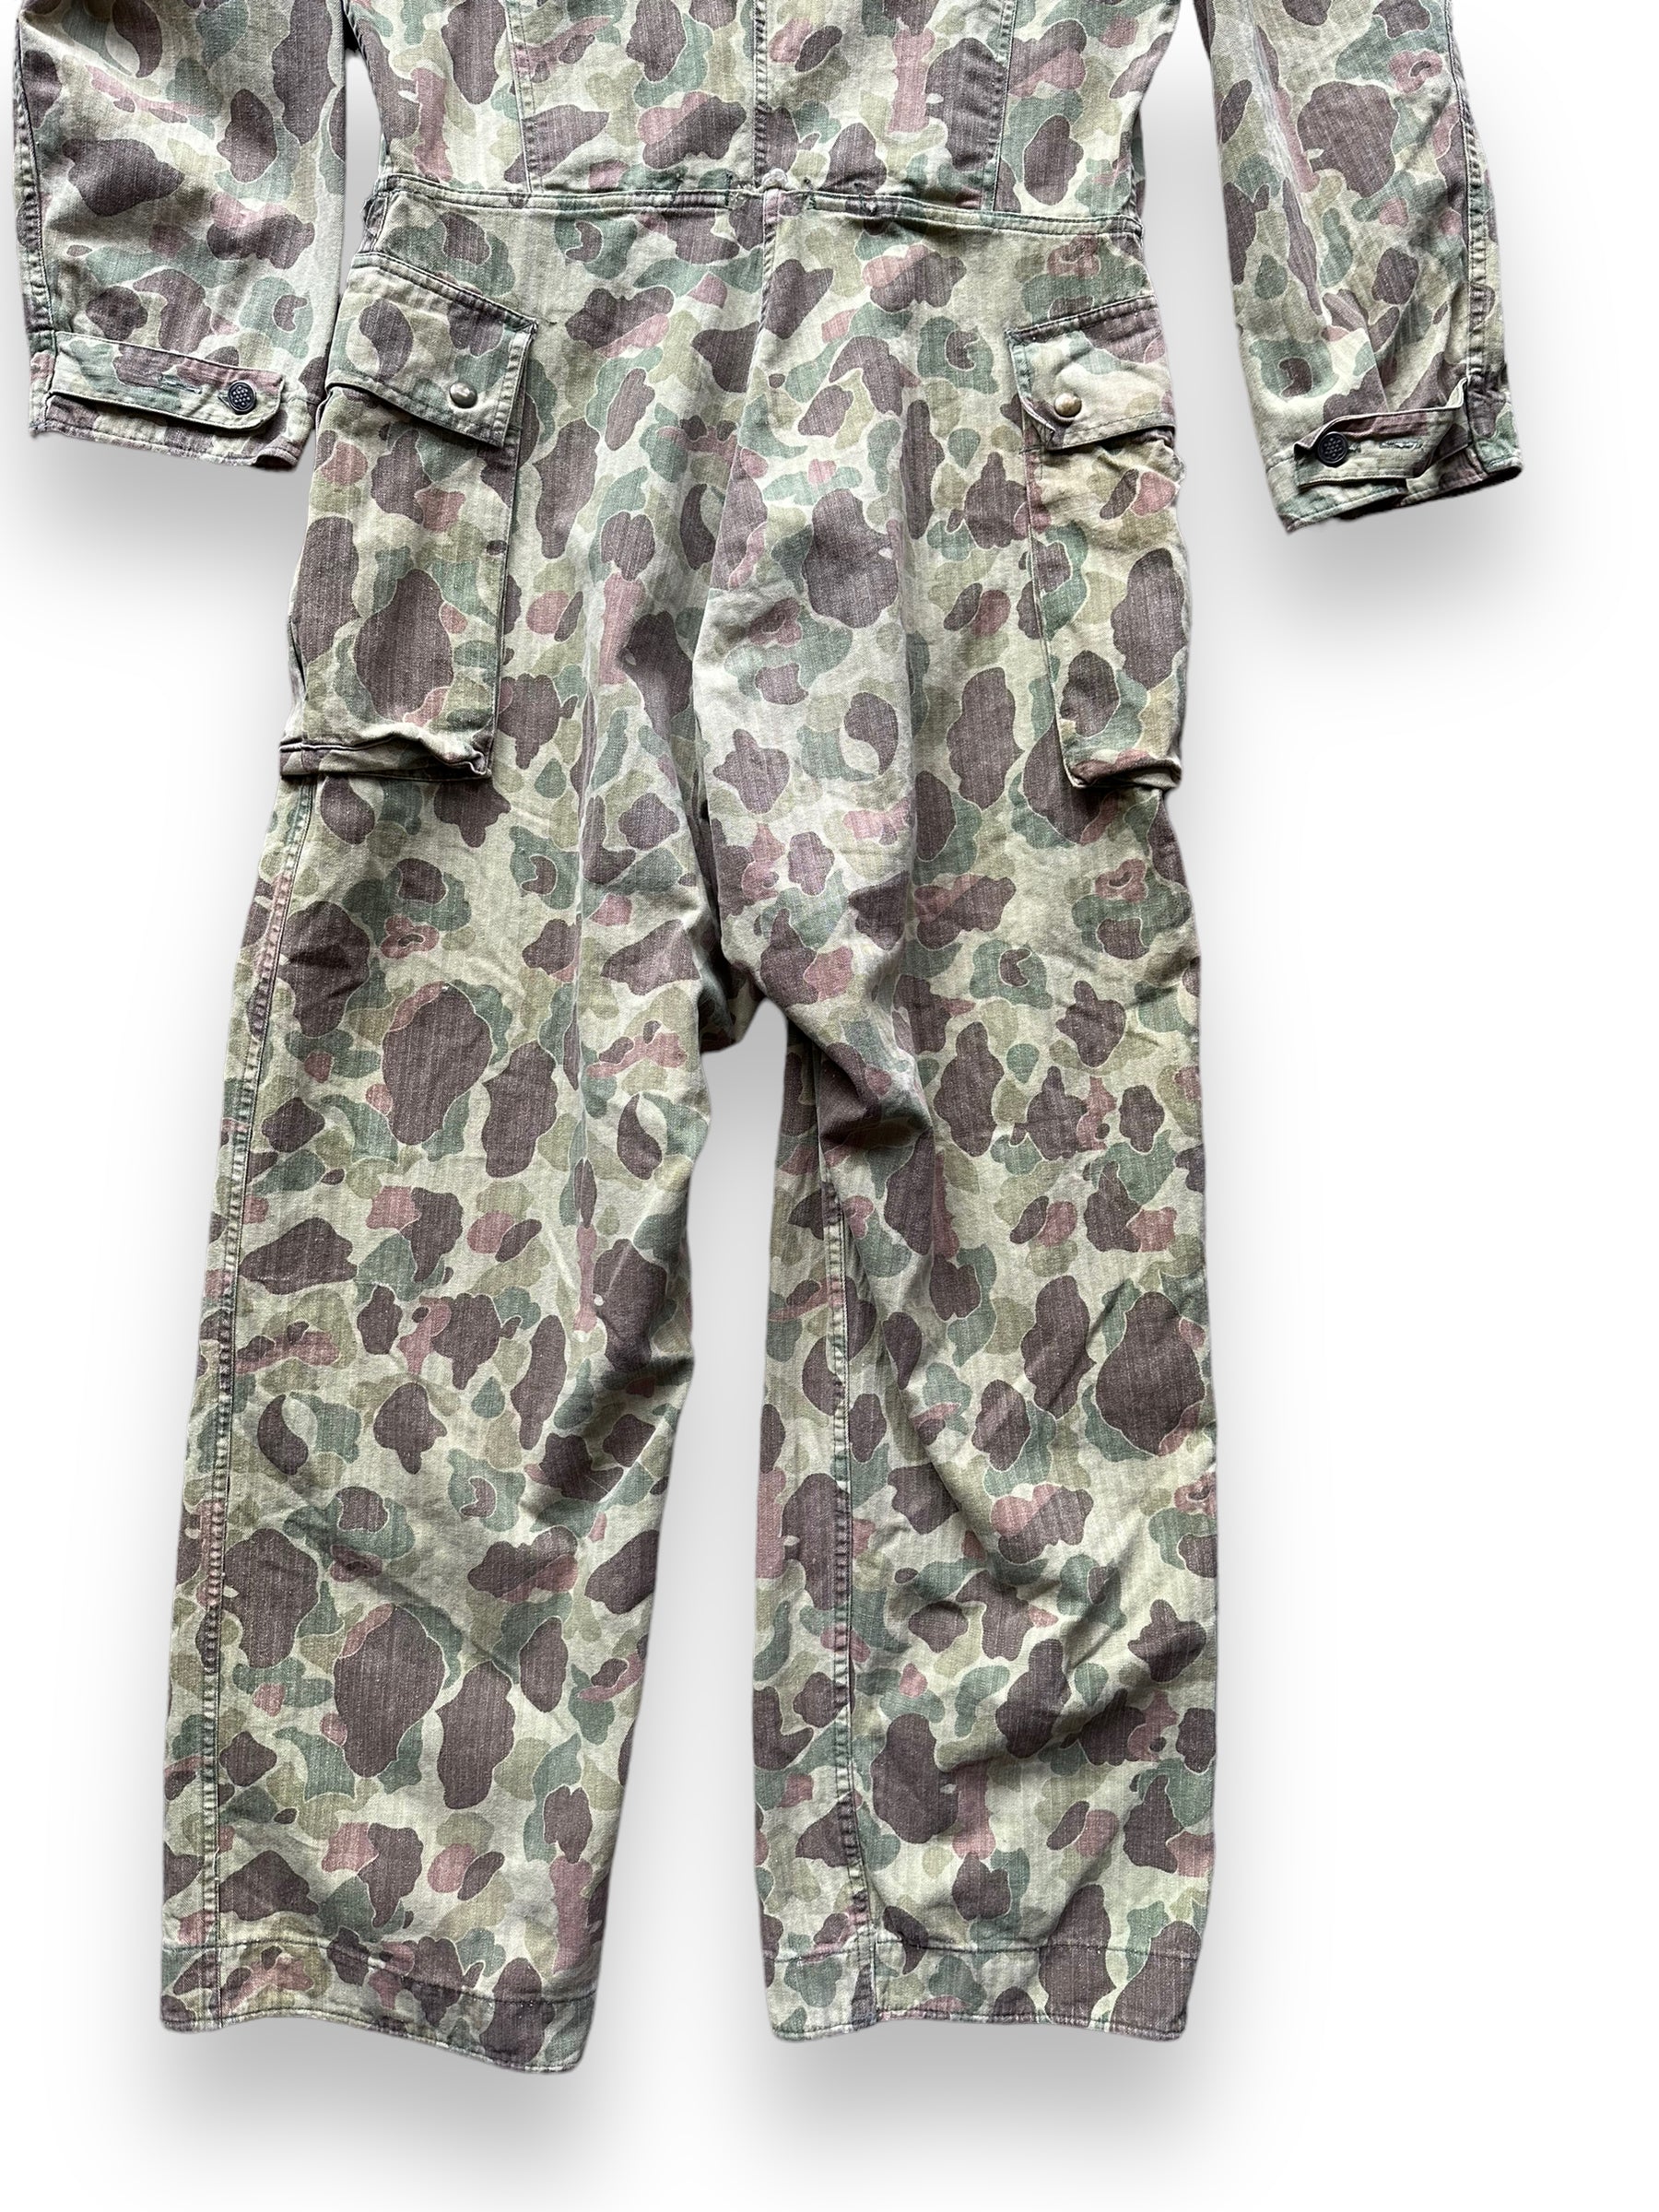 Lower Rear View of Vintage M-4395 HBT Frogskin Camo Coveralls SZ M | Vintage Frog Skin Camo Pants Seattle | Barn Owl Vintage Workwear